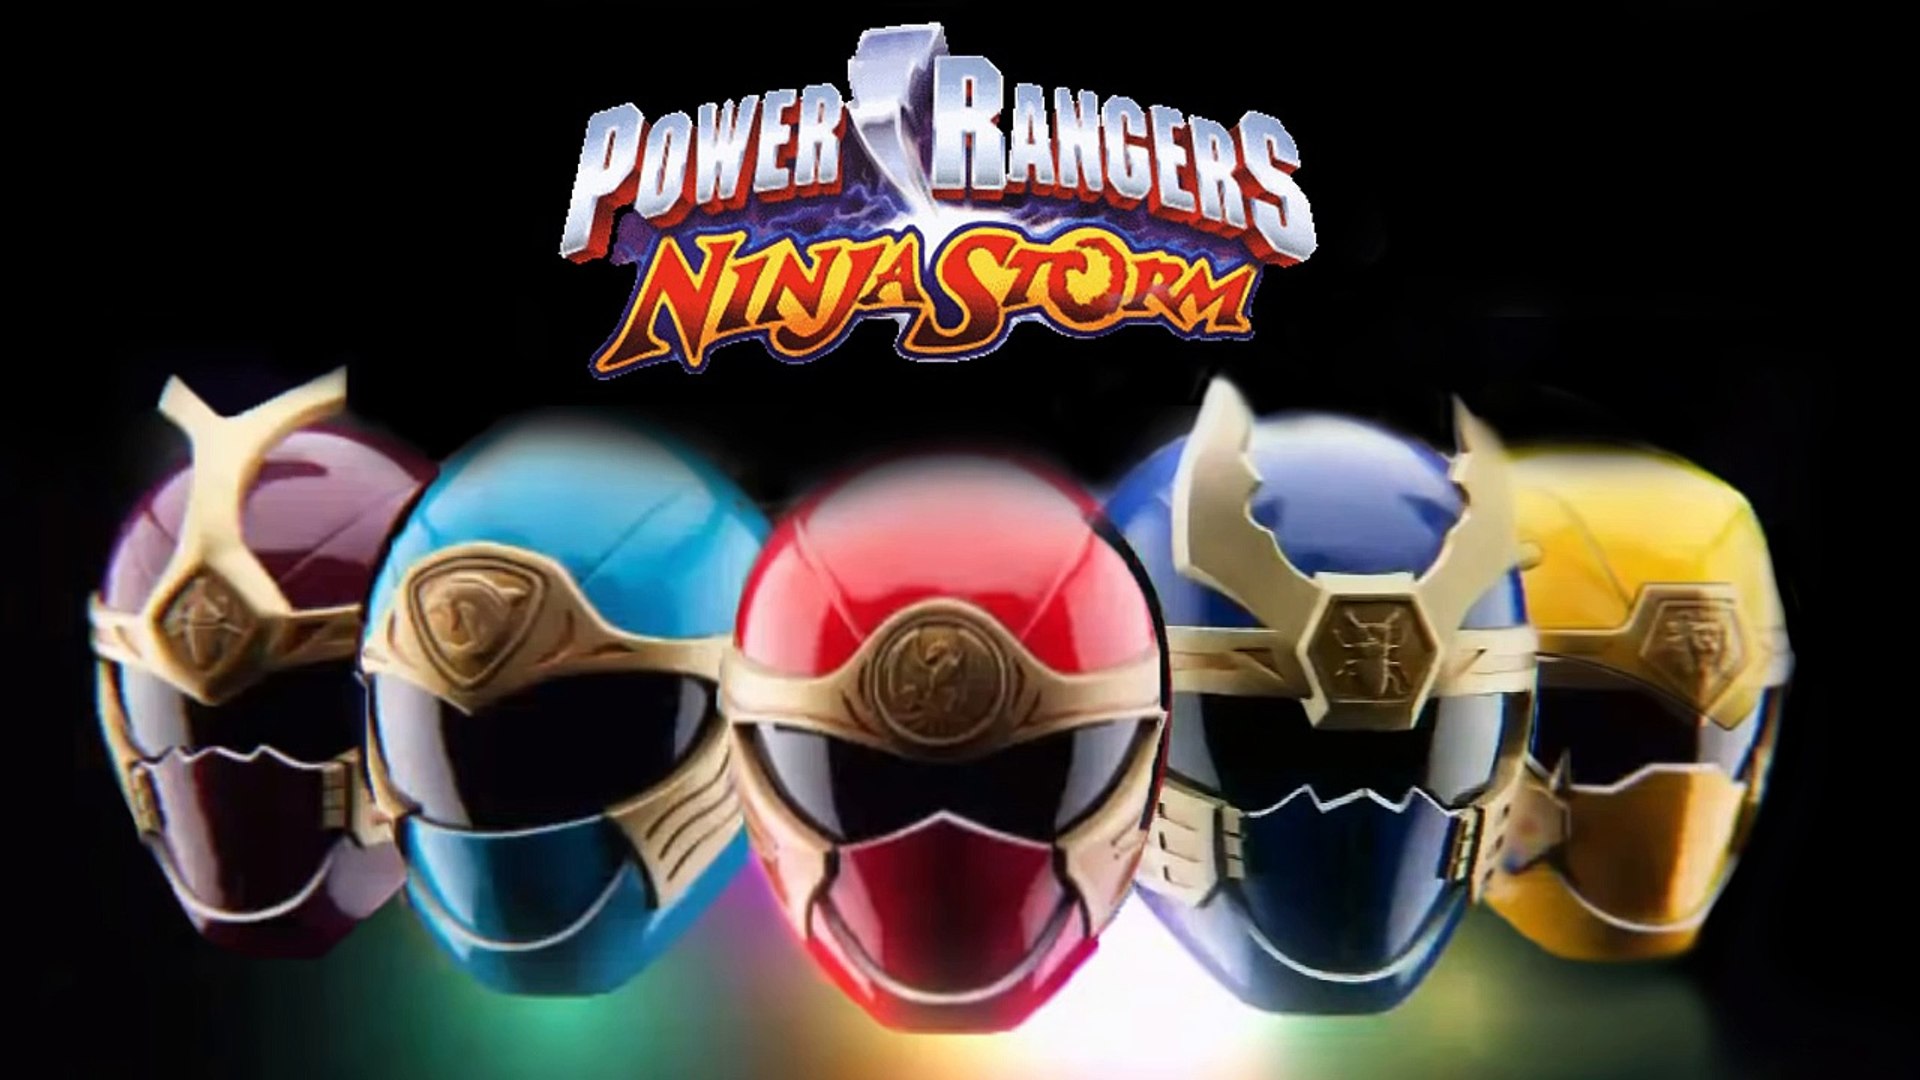 All Power Rangers Theme Songs (1993-2015) - video Dailymotion